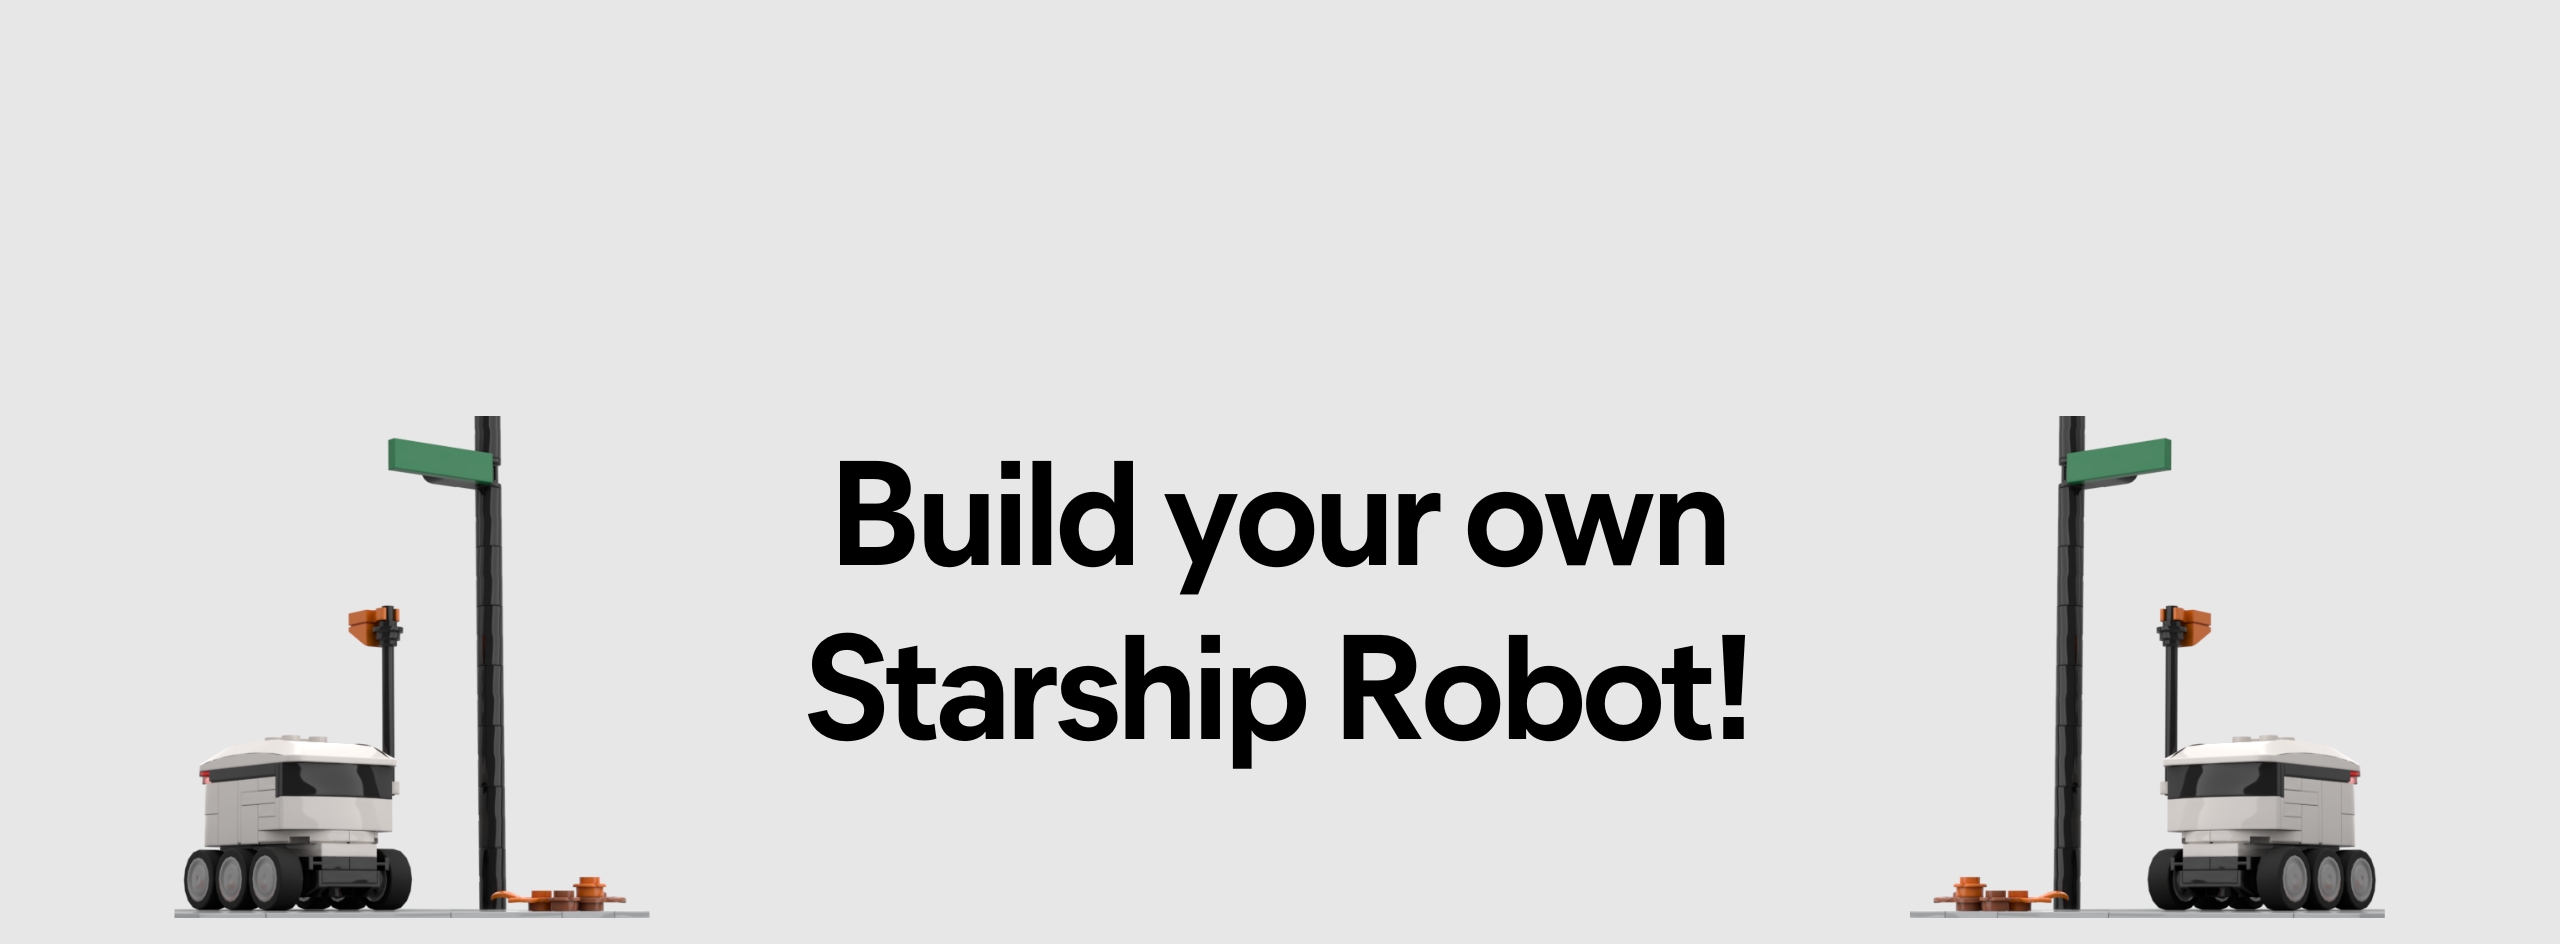 Two versions of the Starship Lego Robot on each end with "Build your own Starship Robot" centered in black text, all on a solid, light gray background.